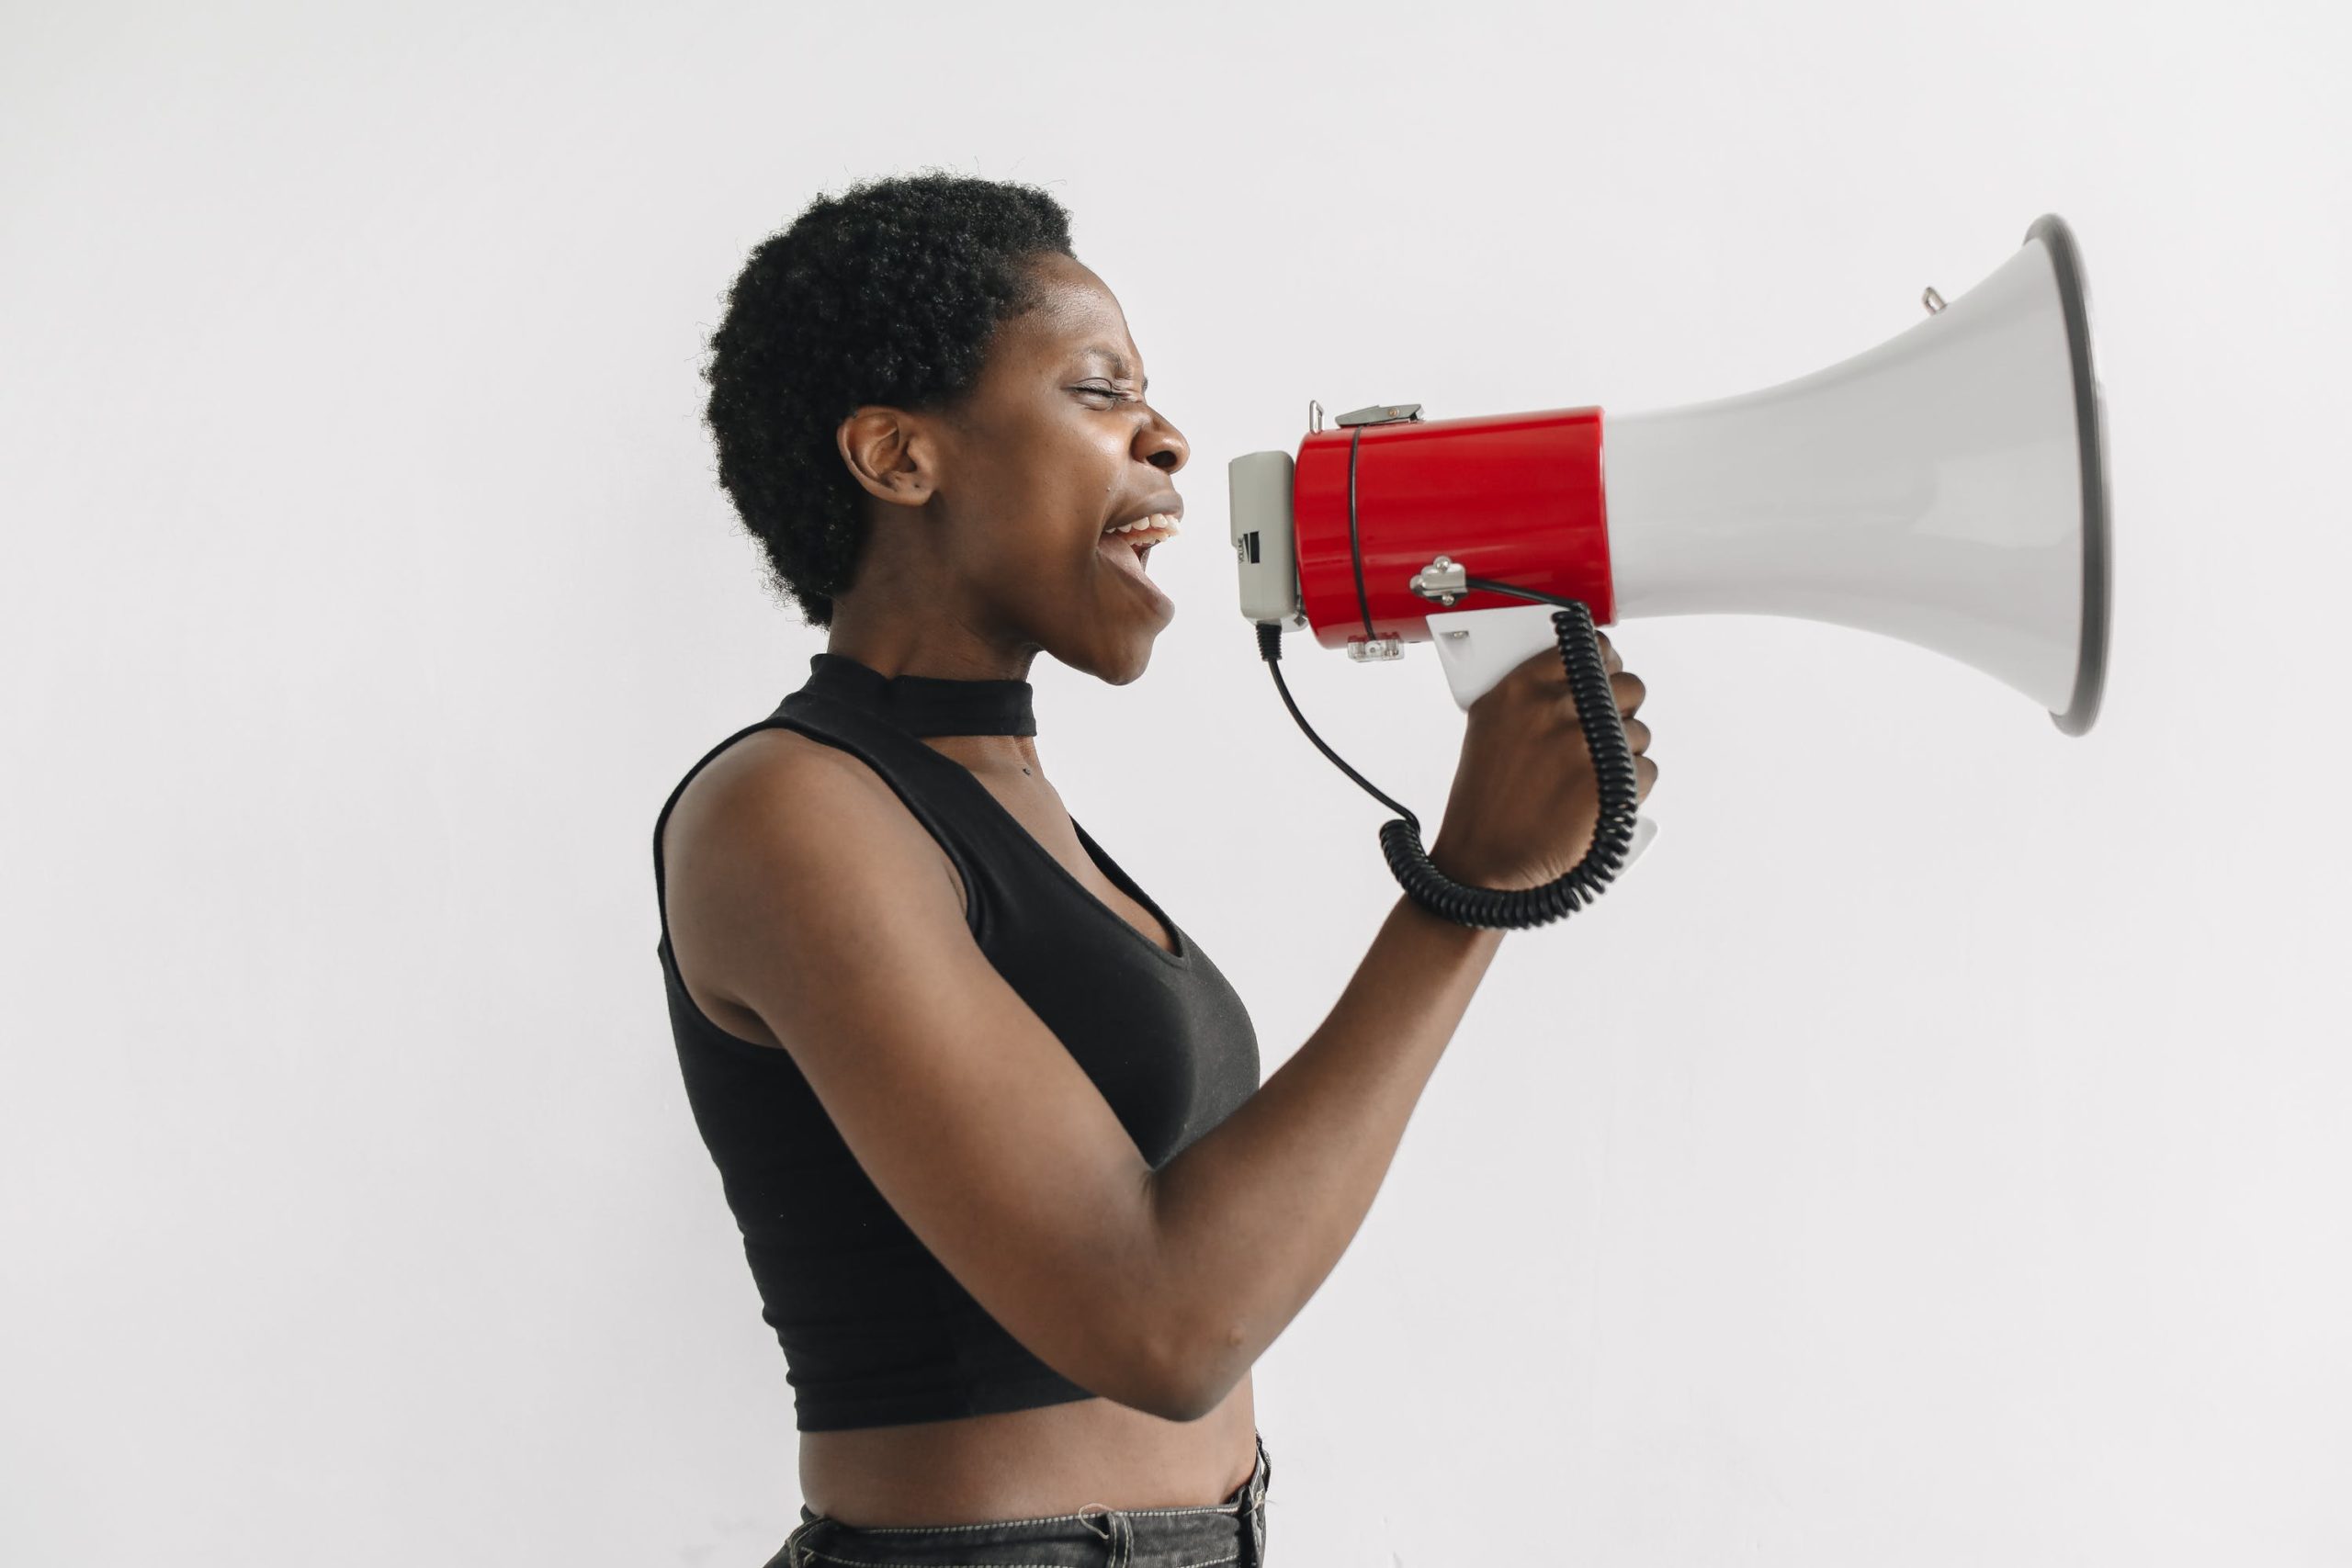 A girl uses a megaphone to clearly communicate